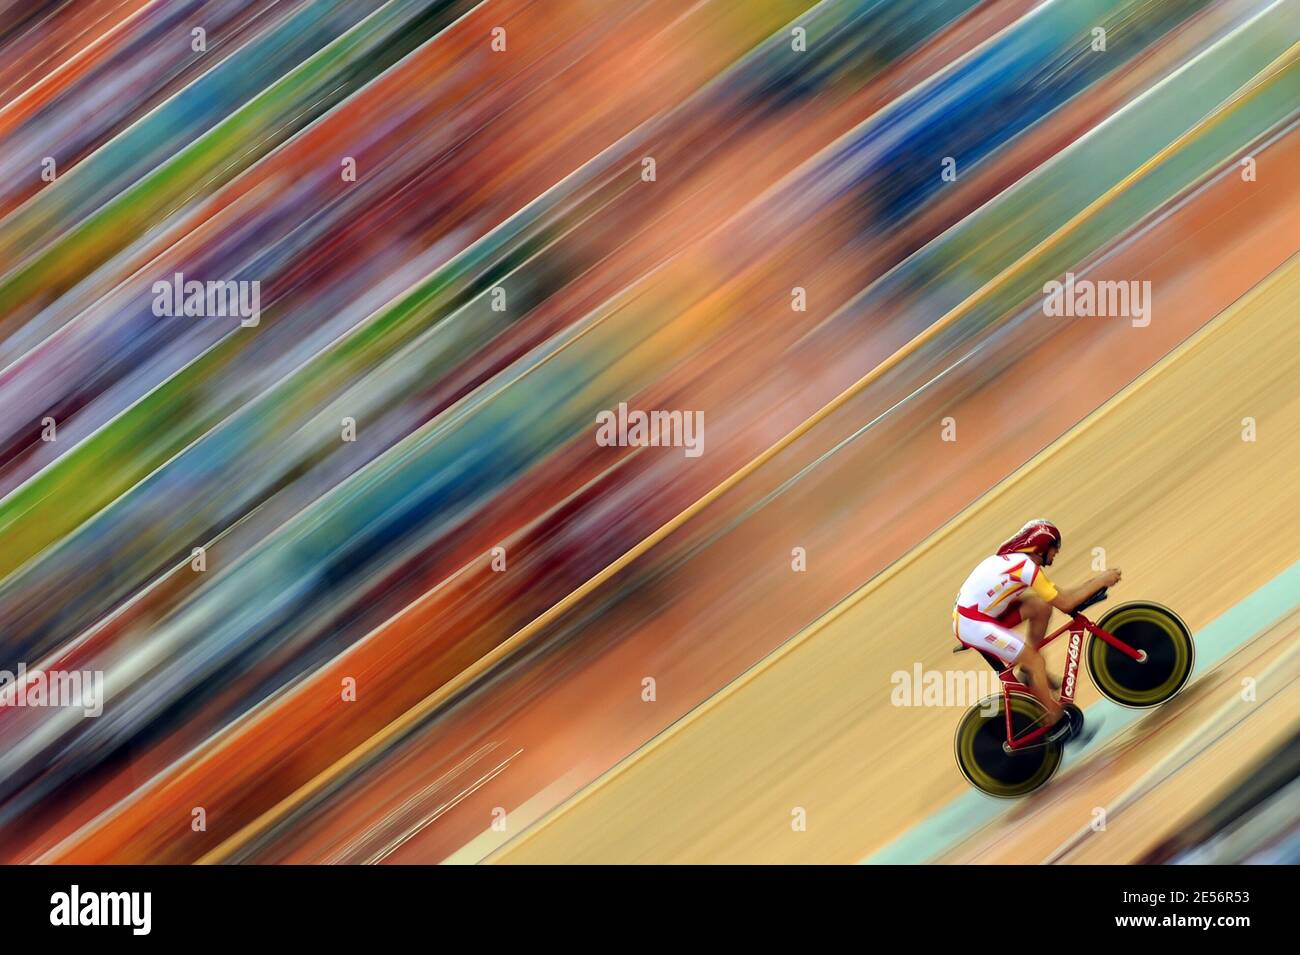 Spain's Sergi Escobar competes on men's individual pursuit during the Beijing Olympic Games Day 7 at the Laoshan Velodrome in Beijing, China on August 15, 2008. Photo by Gouhier-Hahn-Nebinger/Cameleon/ABACAPRESS.COM Stock Photo